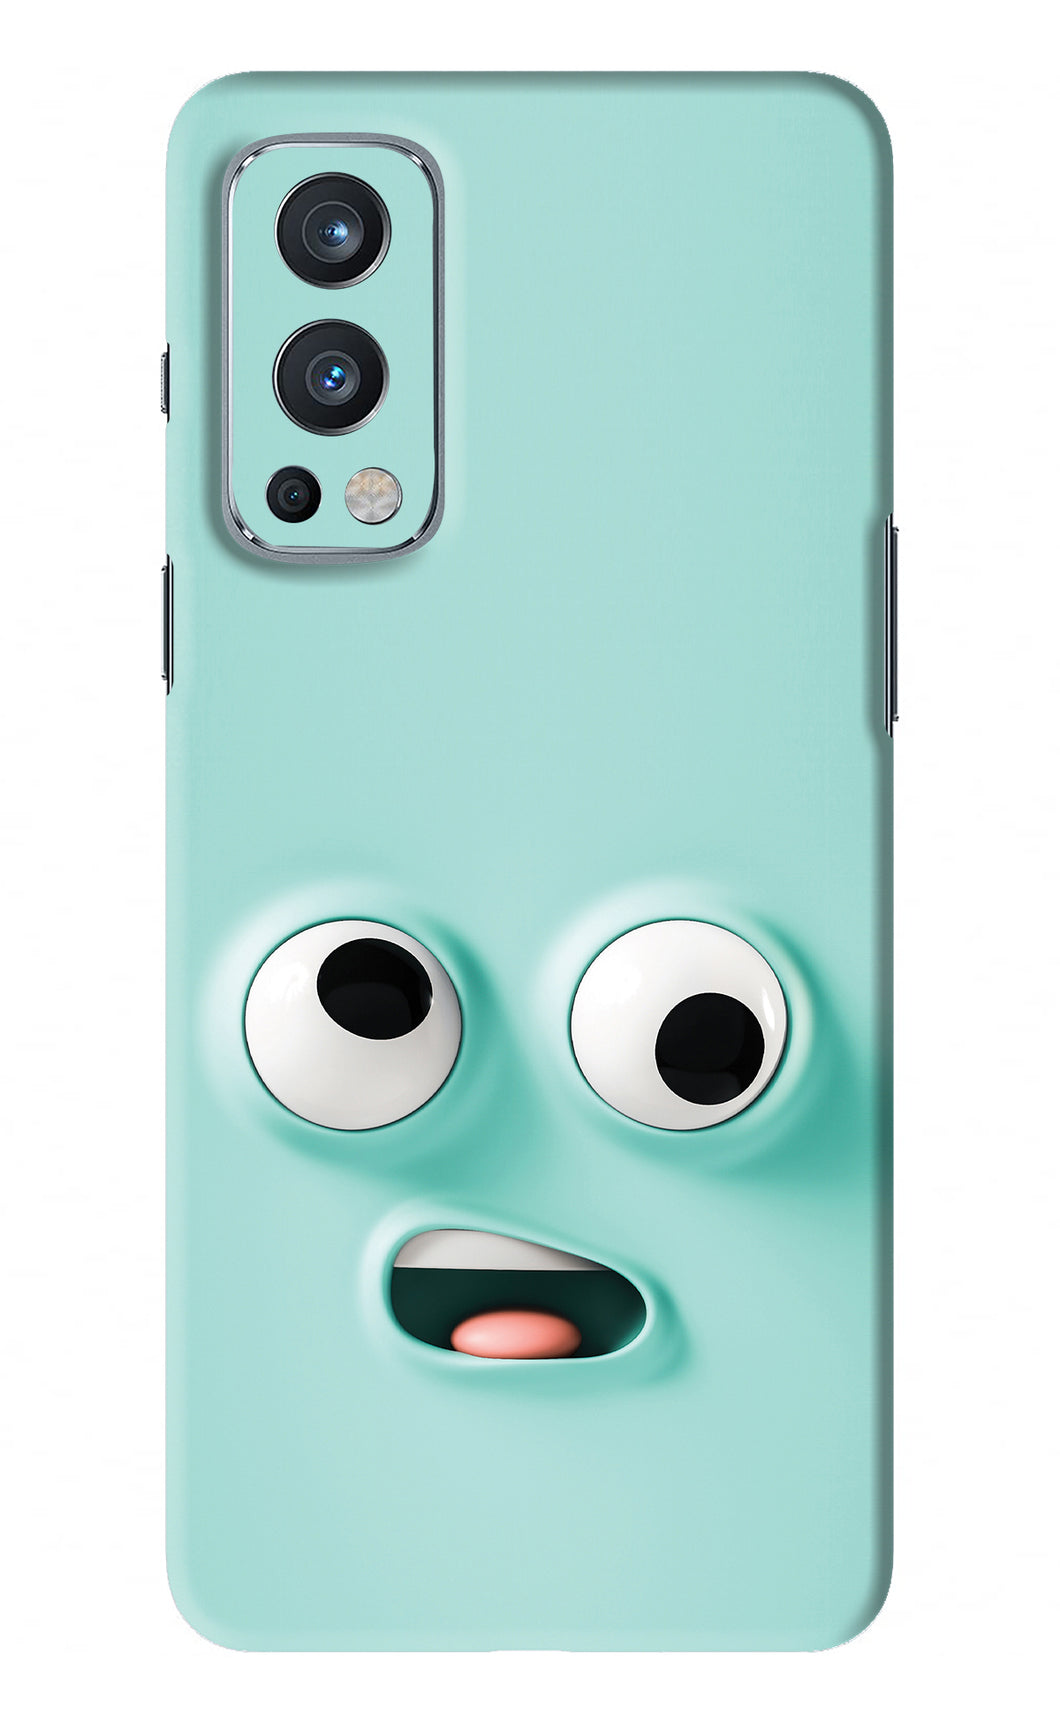 Silly Face Cartoon Oneplus Nord 2 Back Skin Wrap